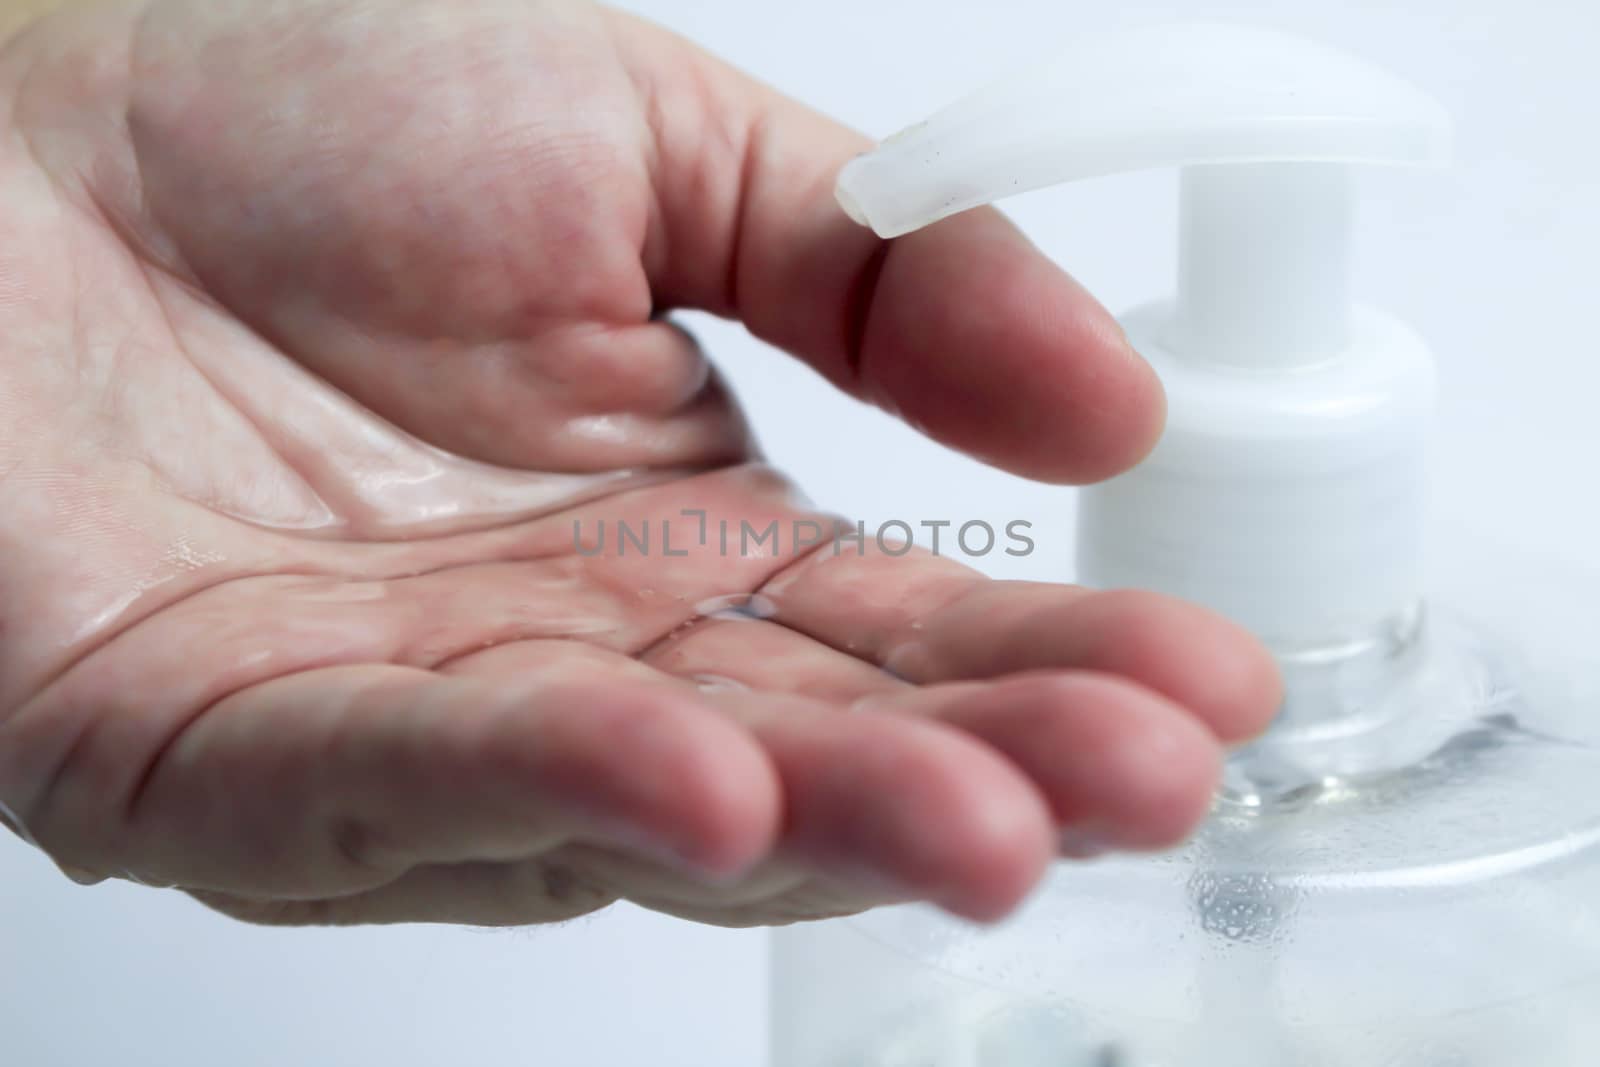 Hydroalcoholic gel bottle pouring gel into a hand on white background